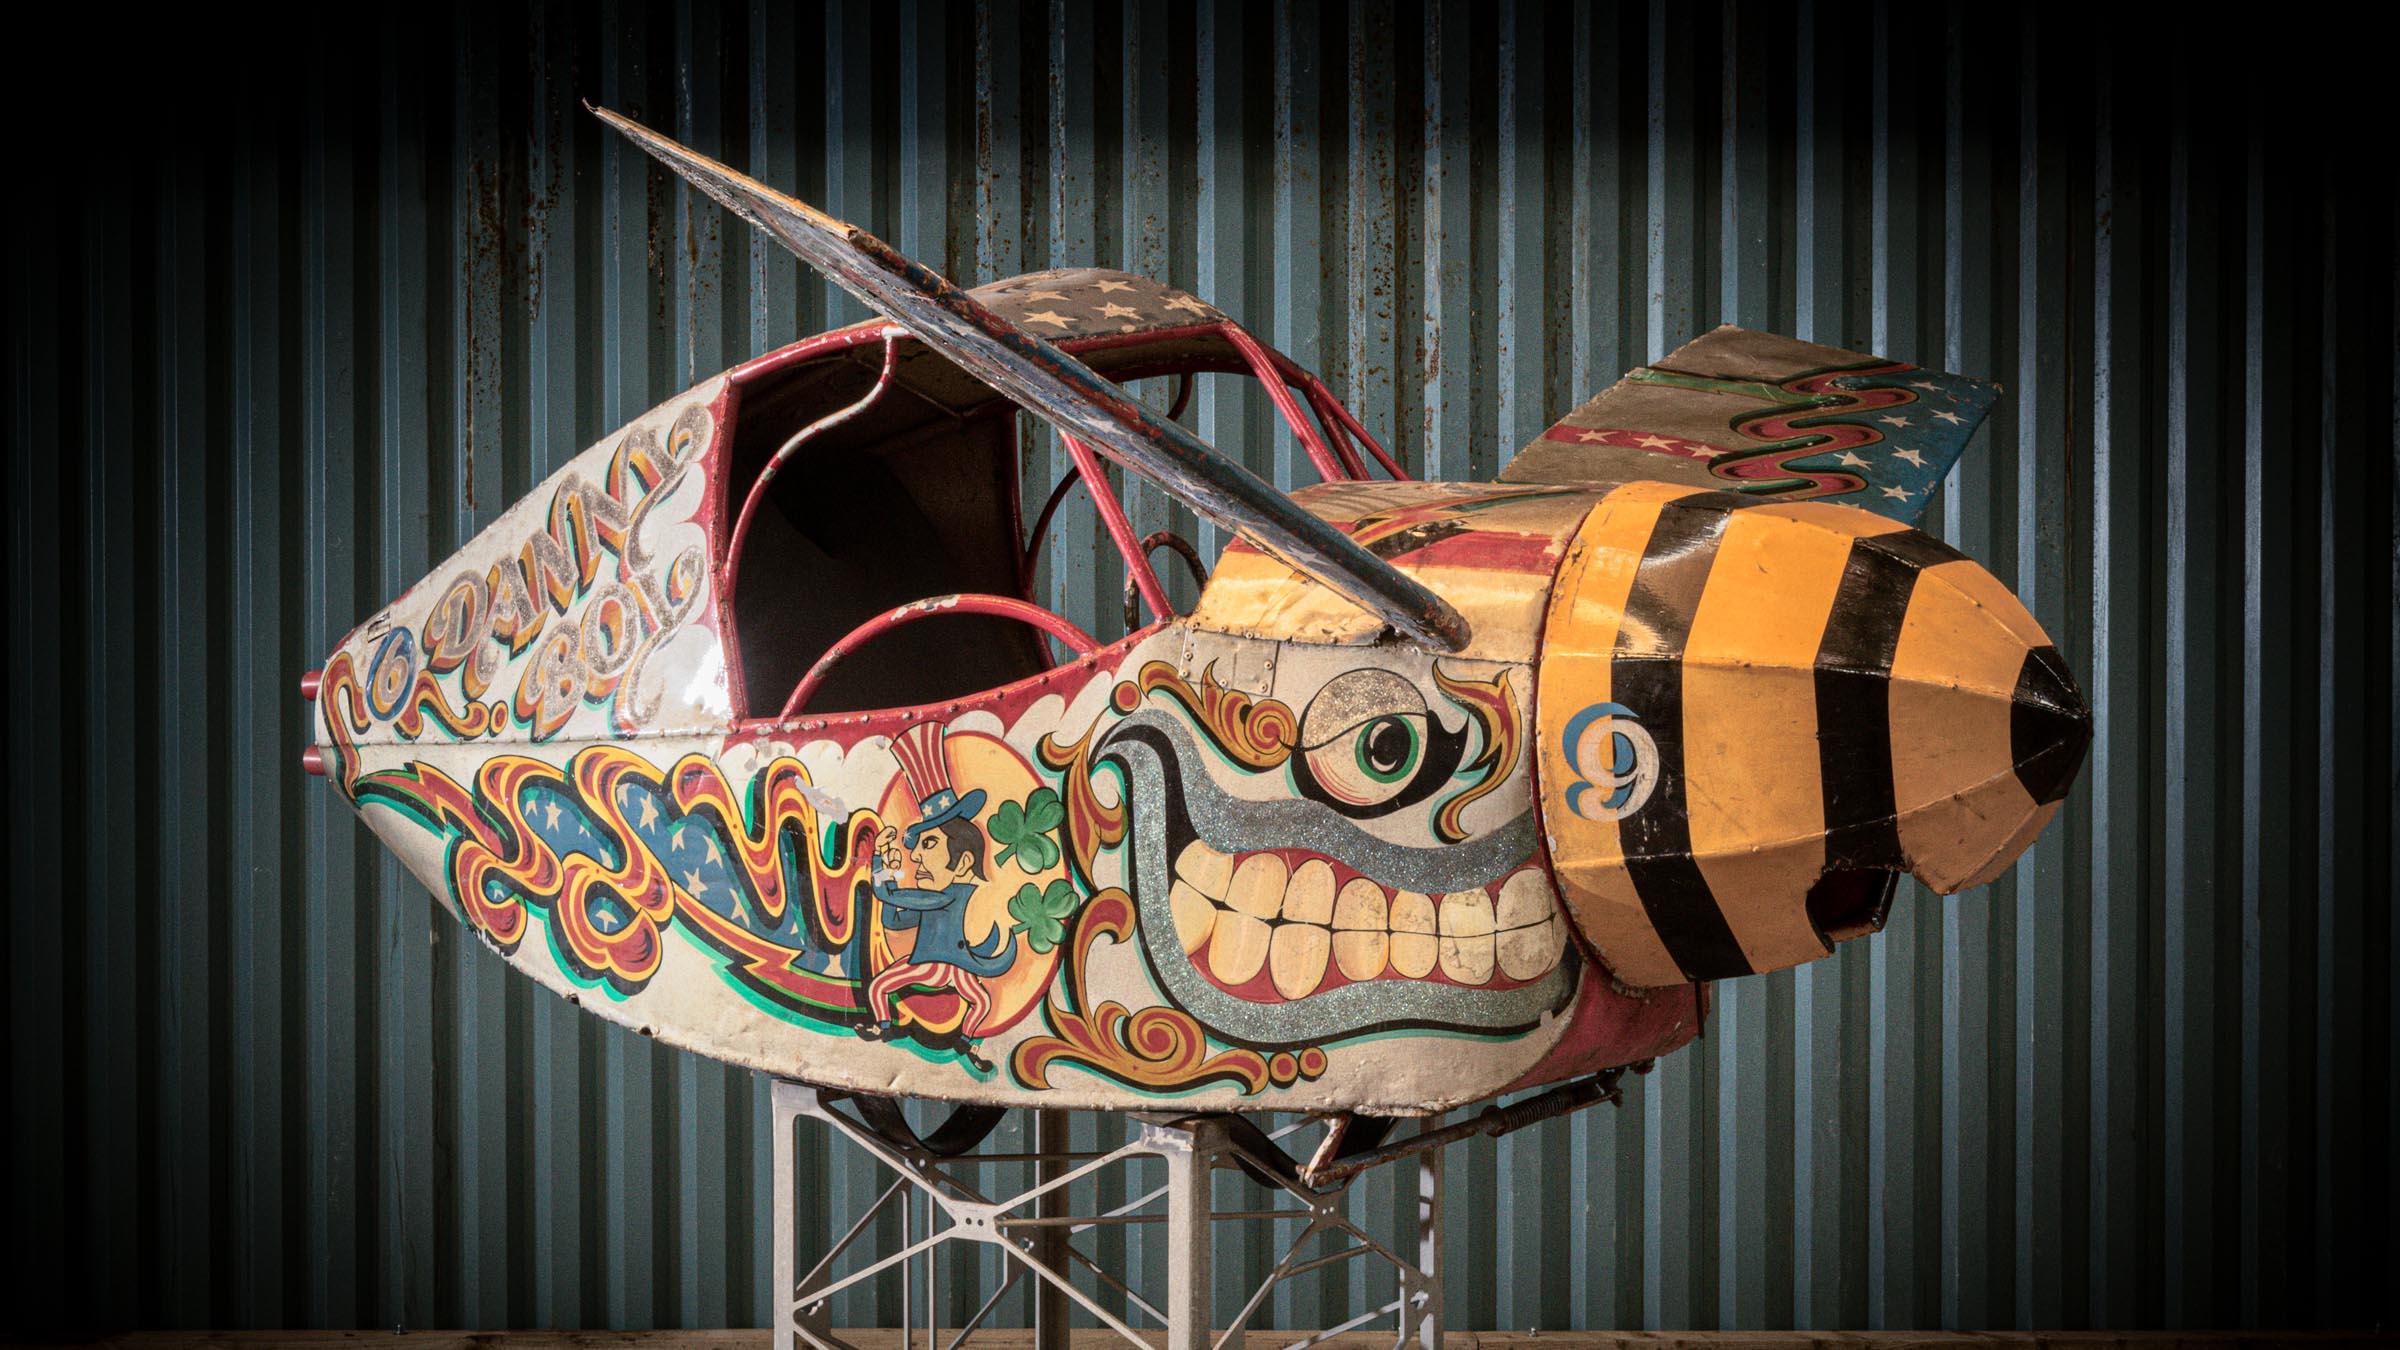 Masons Fly O Plane Number ‘6 - Danny Boy’. A stunning and most rarest of English fairground ride history and the art form that went hand in hand with this genre. Manufactured in the US in 1948, the ride was brought to the UK in 1951 for the Festival